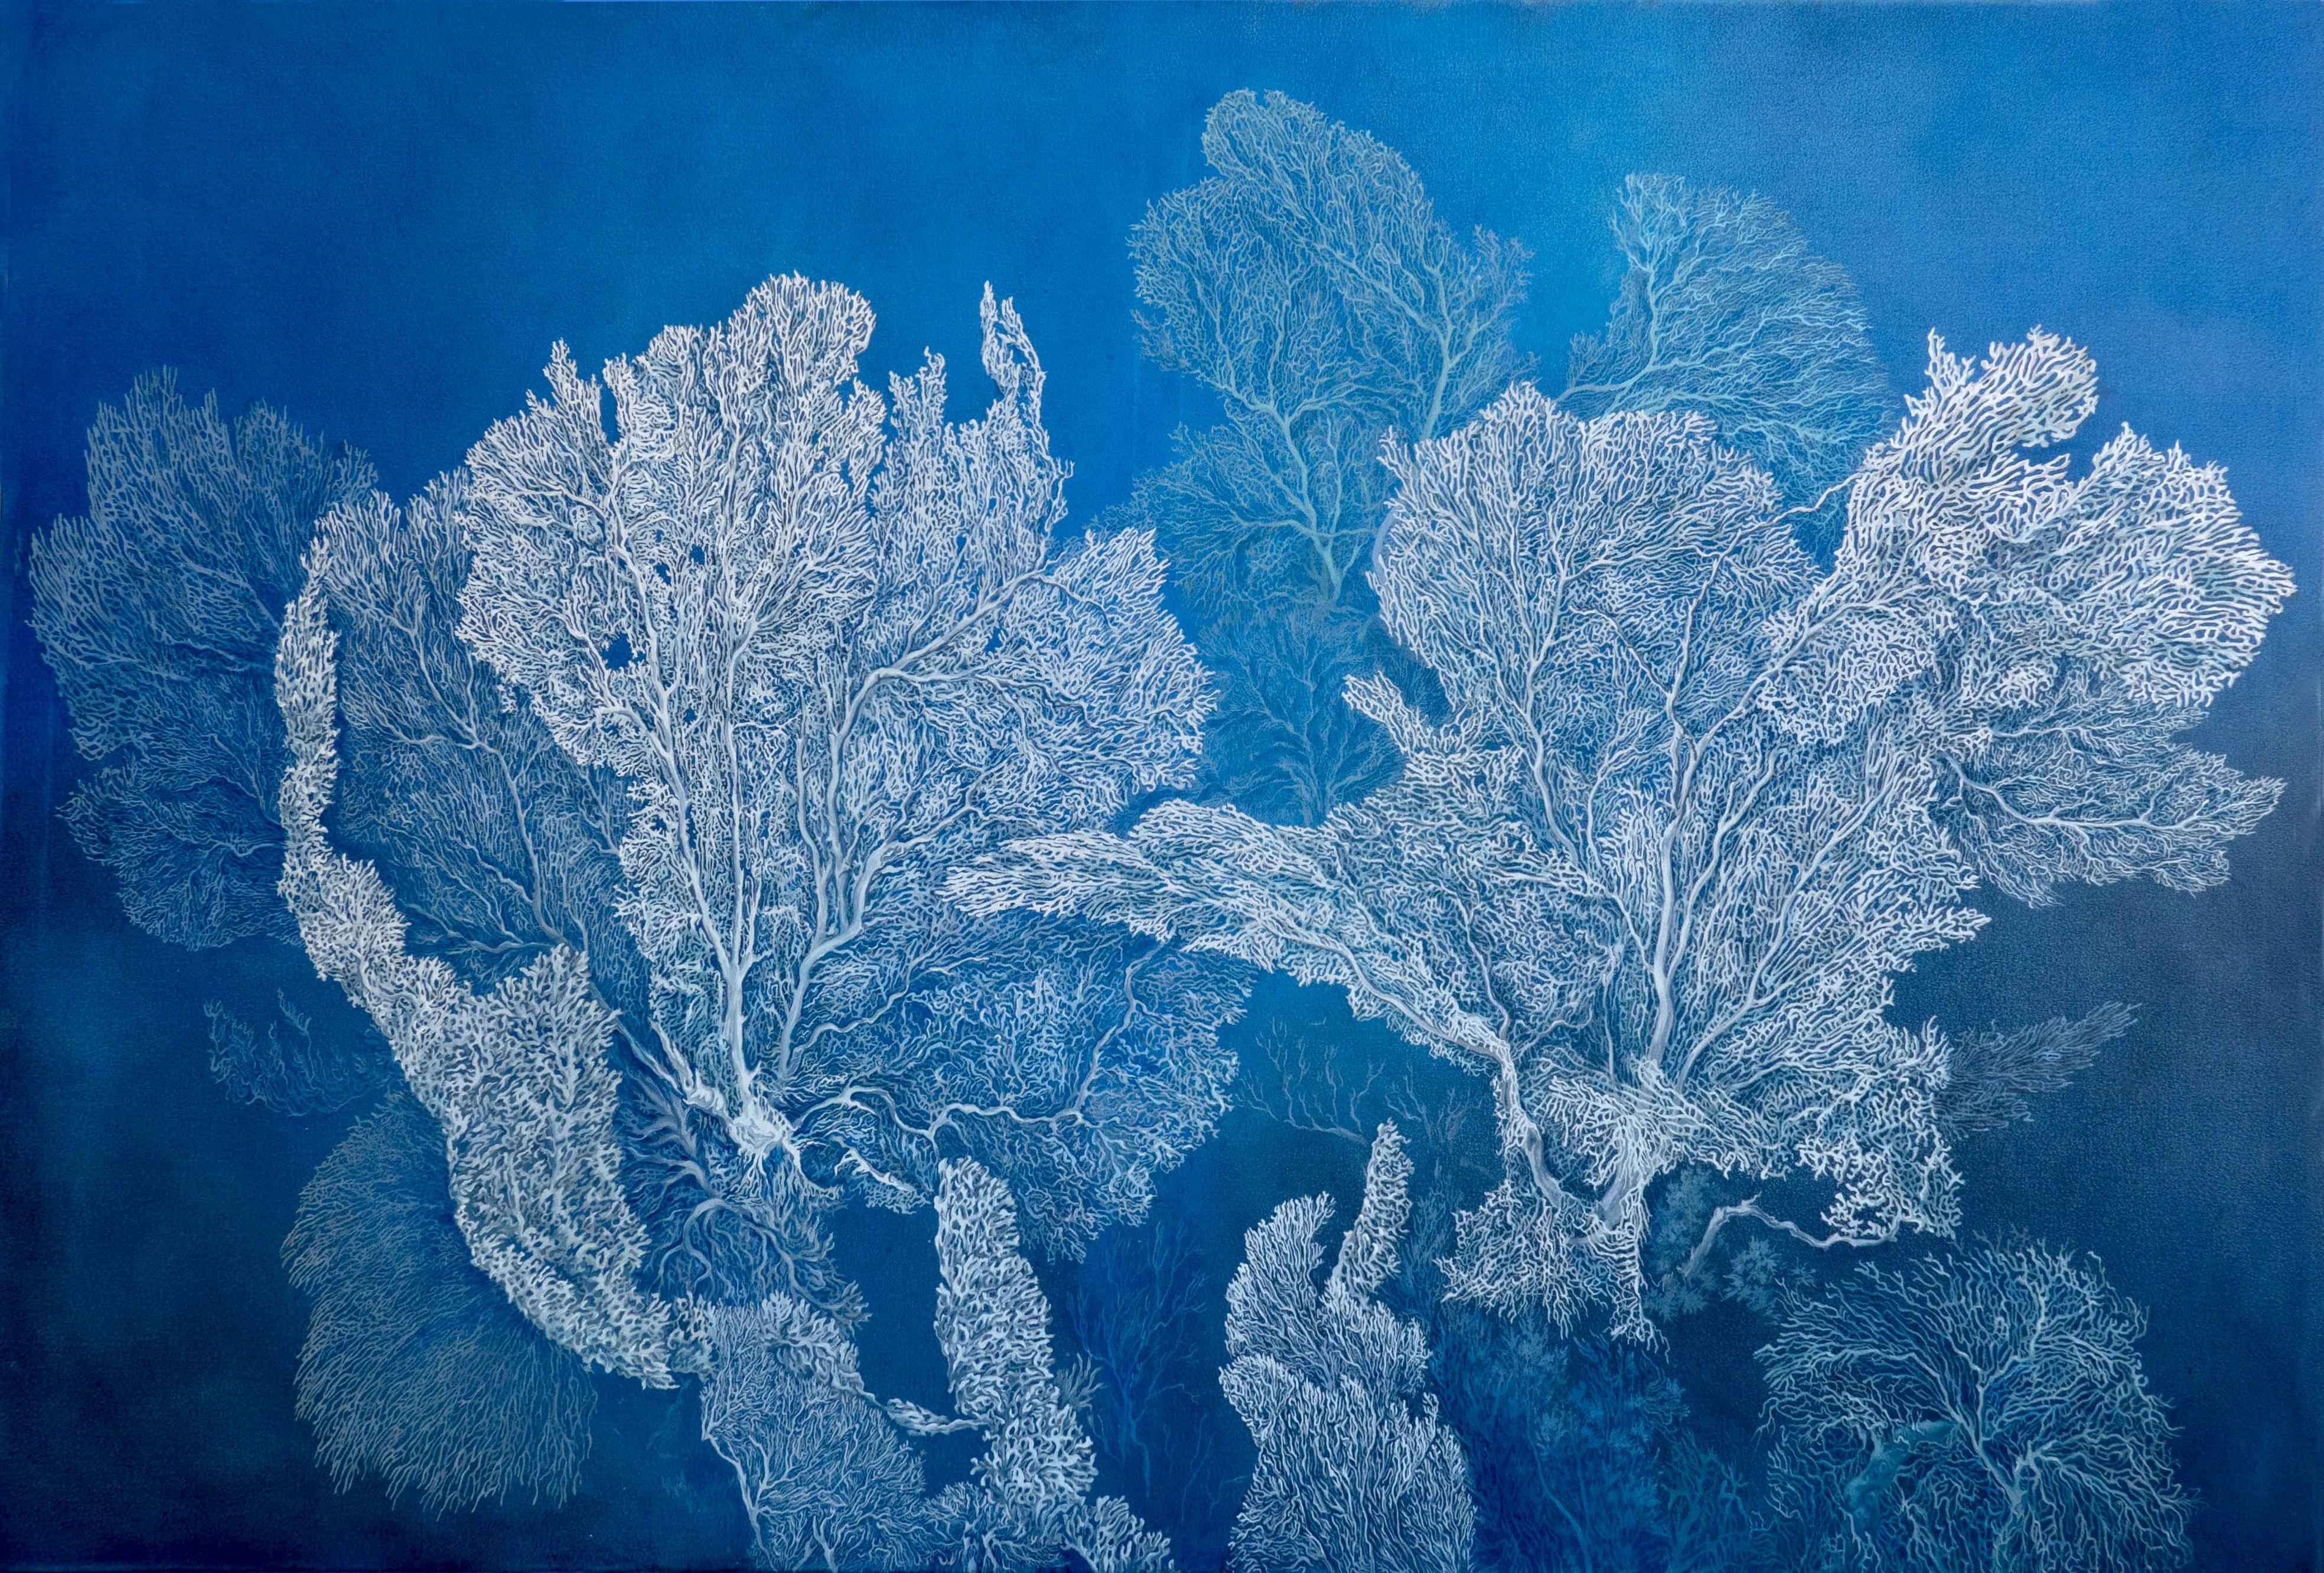 Coral Garden (Ocean)- oil on canvas, made in white, blue colors